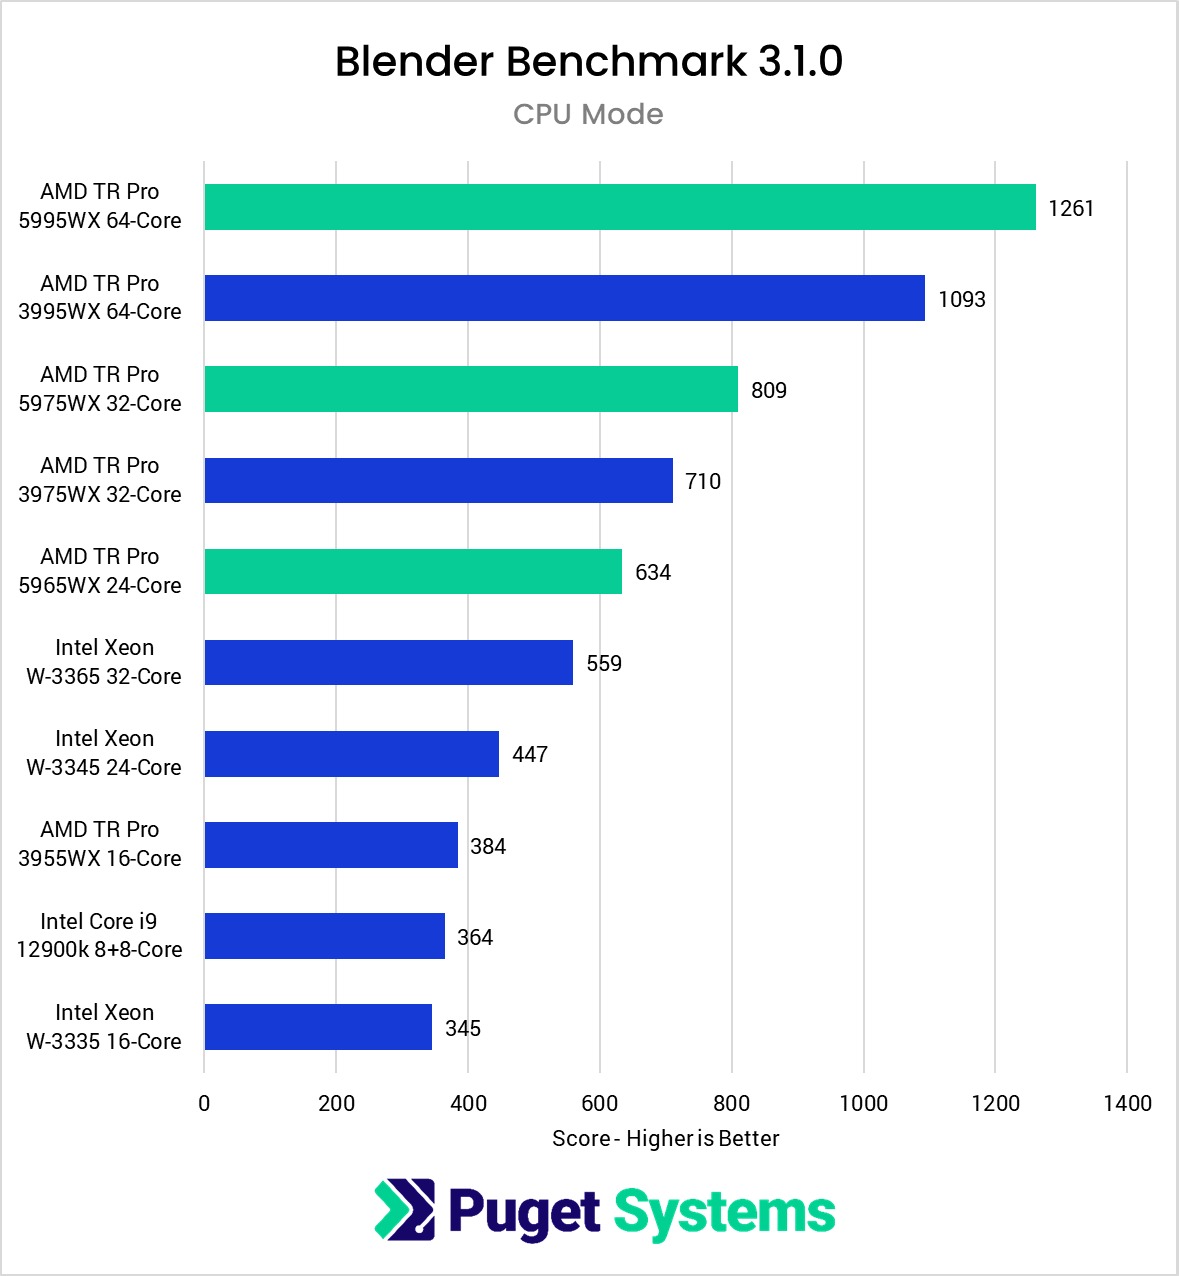 Graph showing relative performance of AMD\u0027d Threadripper PRO 5000-series, 3000-Series, and Intel Xeon W-3000 series. With Threadripper Pro 5000 series having a significant lead over the others.